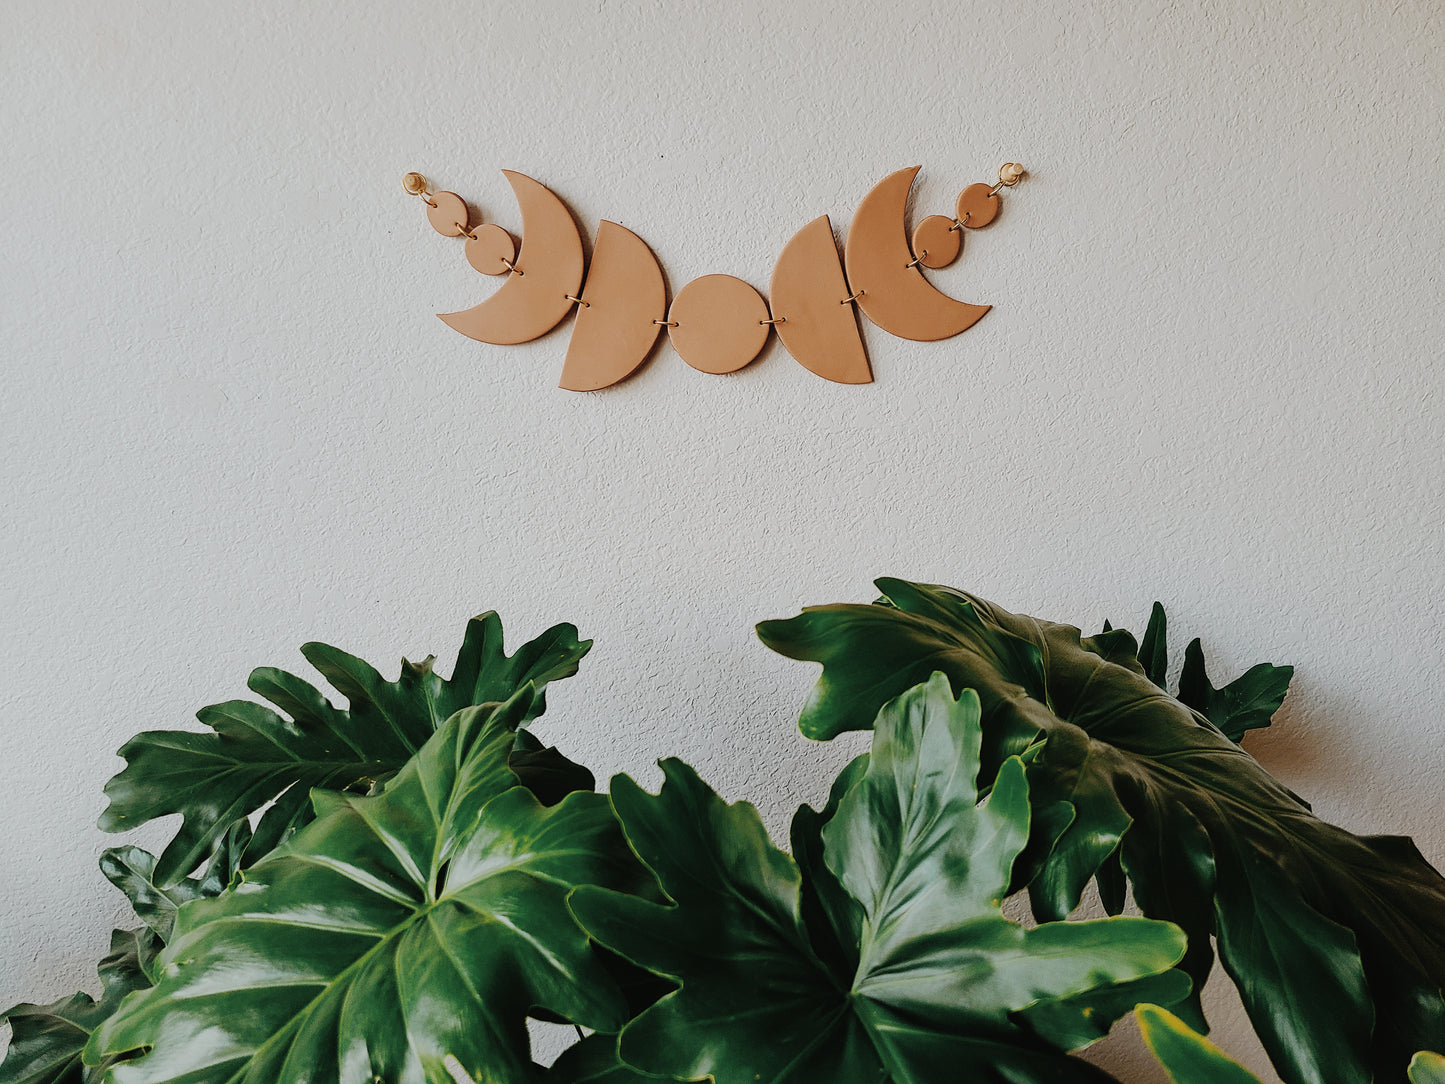 hanging horizontally with two wooden tacks provided in packaging, this lunar wall art design is sure to complement your house plants planted in terracotta ceramics.